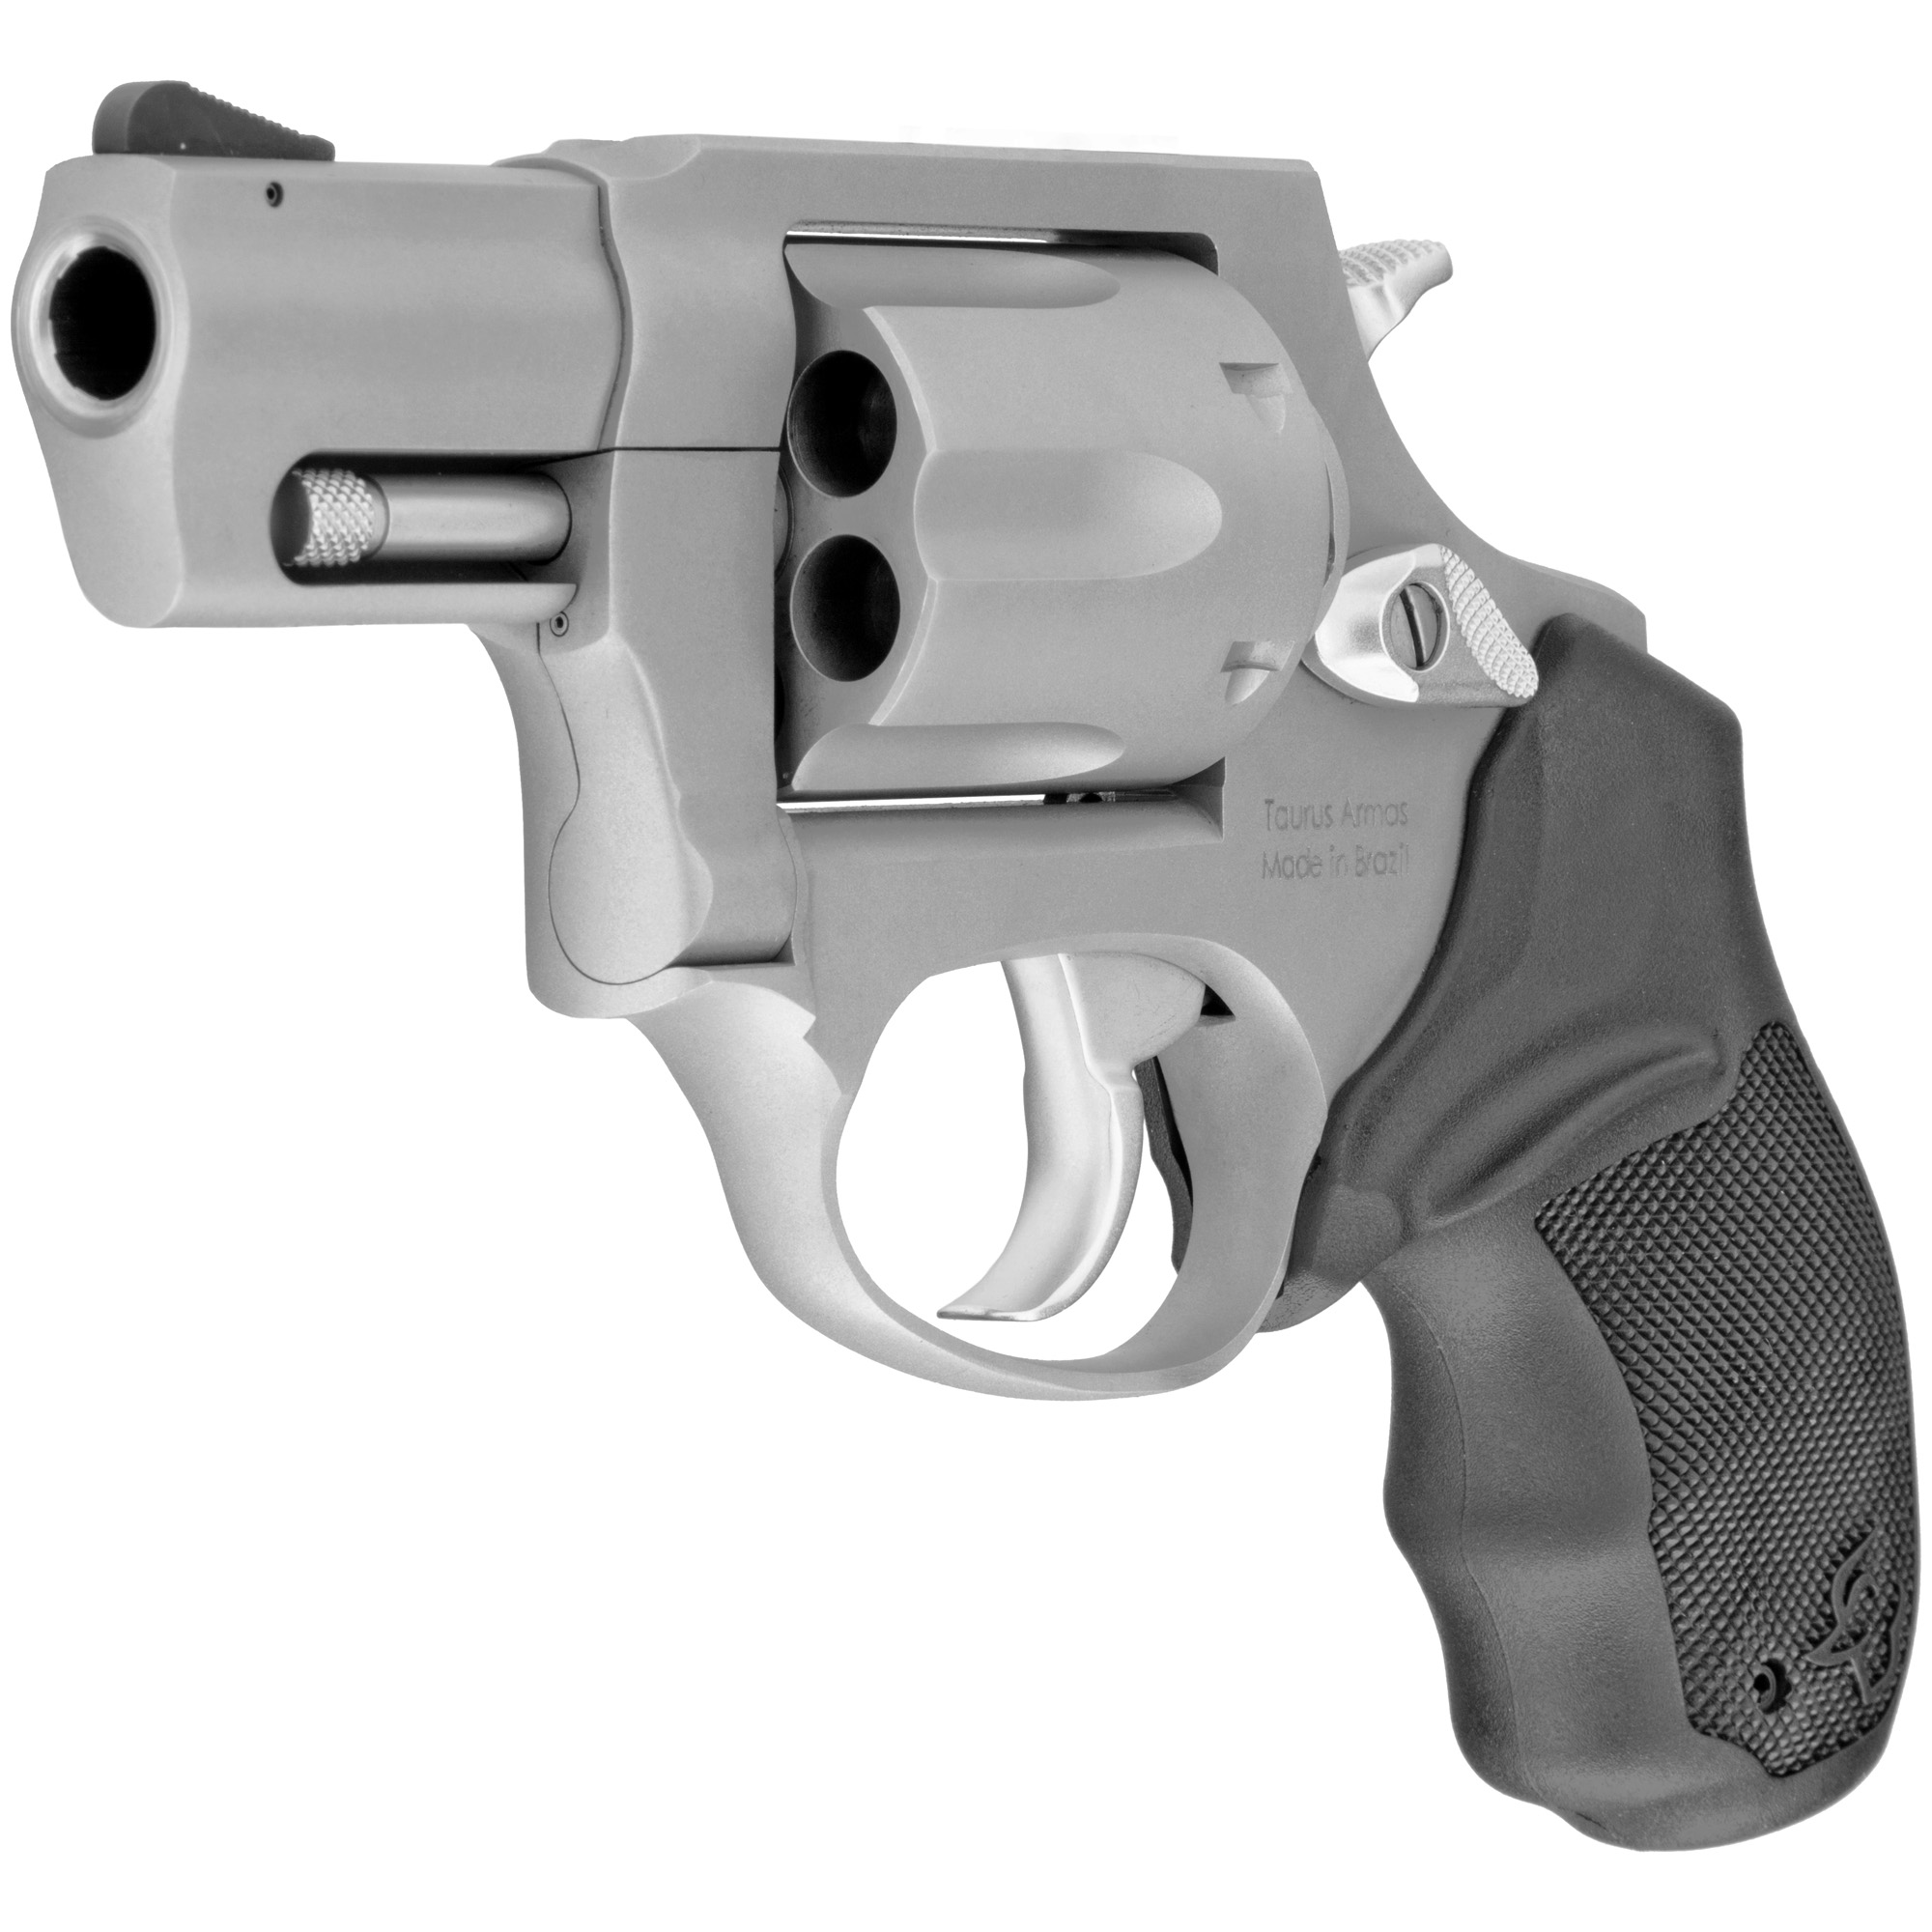 Taurus, Model 856CH, Double Action, Metal Frame Revolver, Small Frame, 38 Special, 2" Barrel, Stainless Steel, Matte Finish, Silver, Rubber Grips, Fixed Sights, 6 Rounds